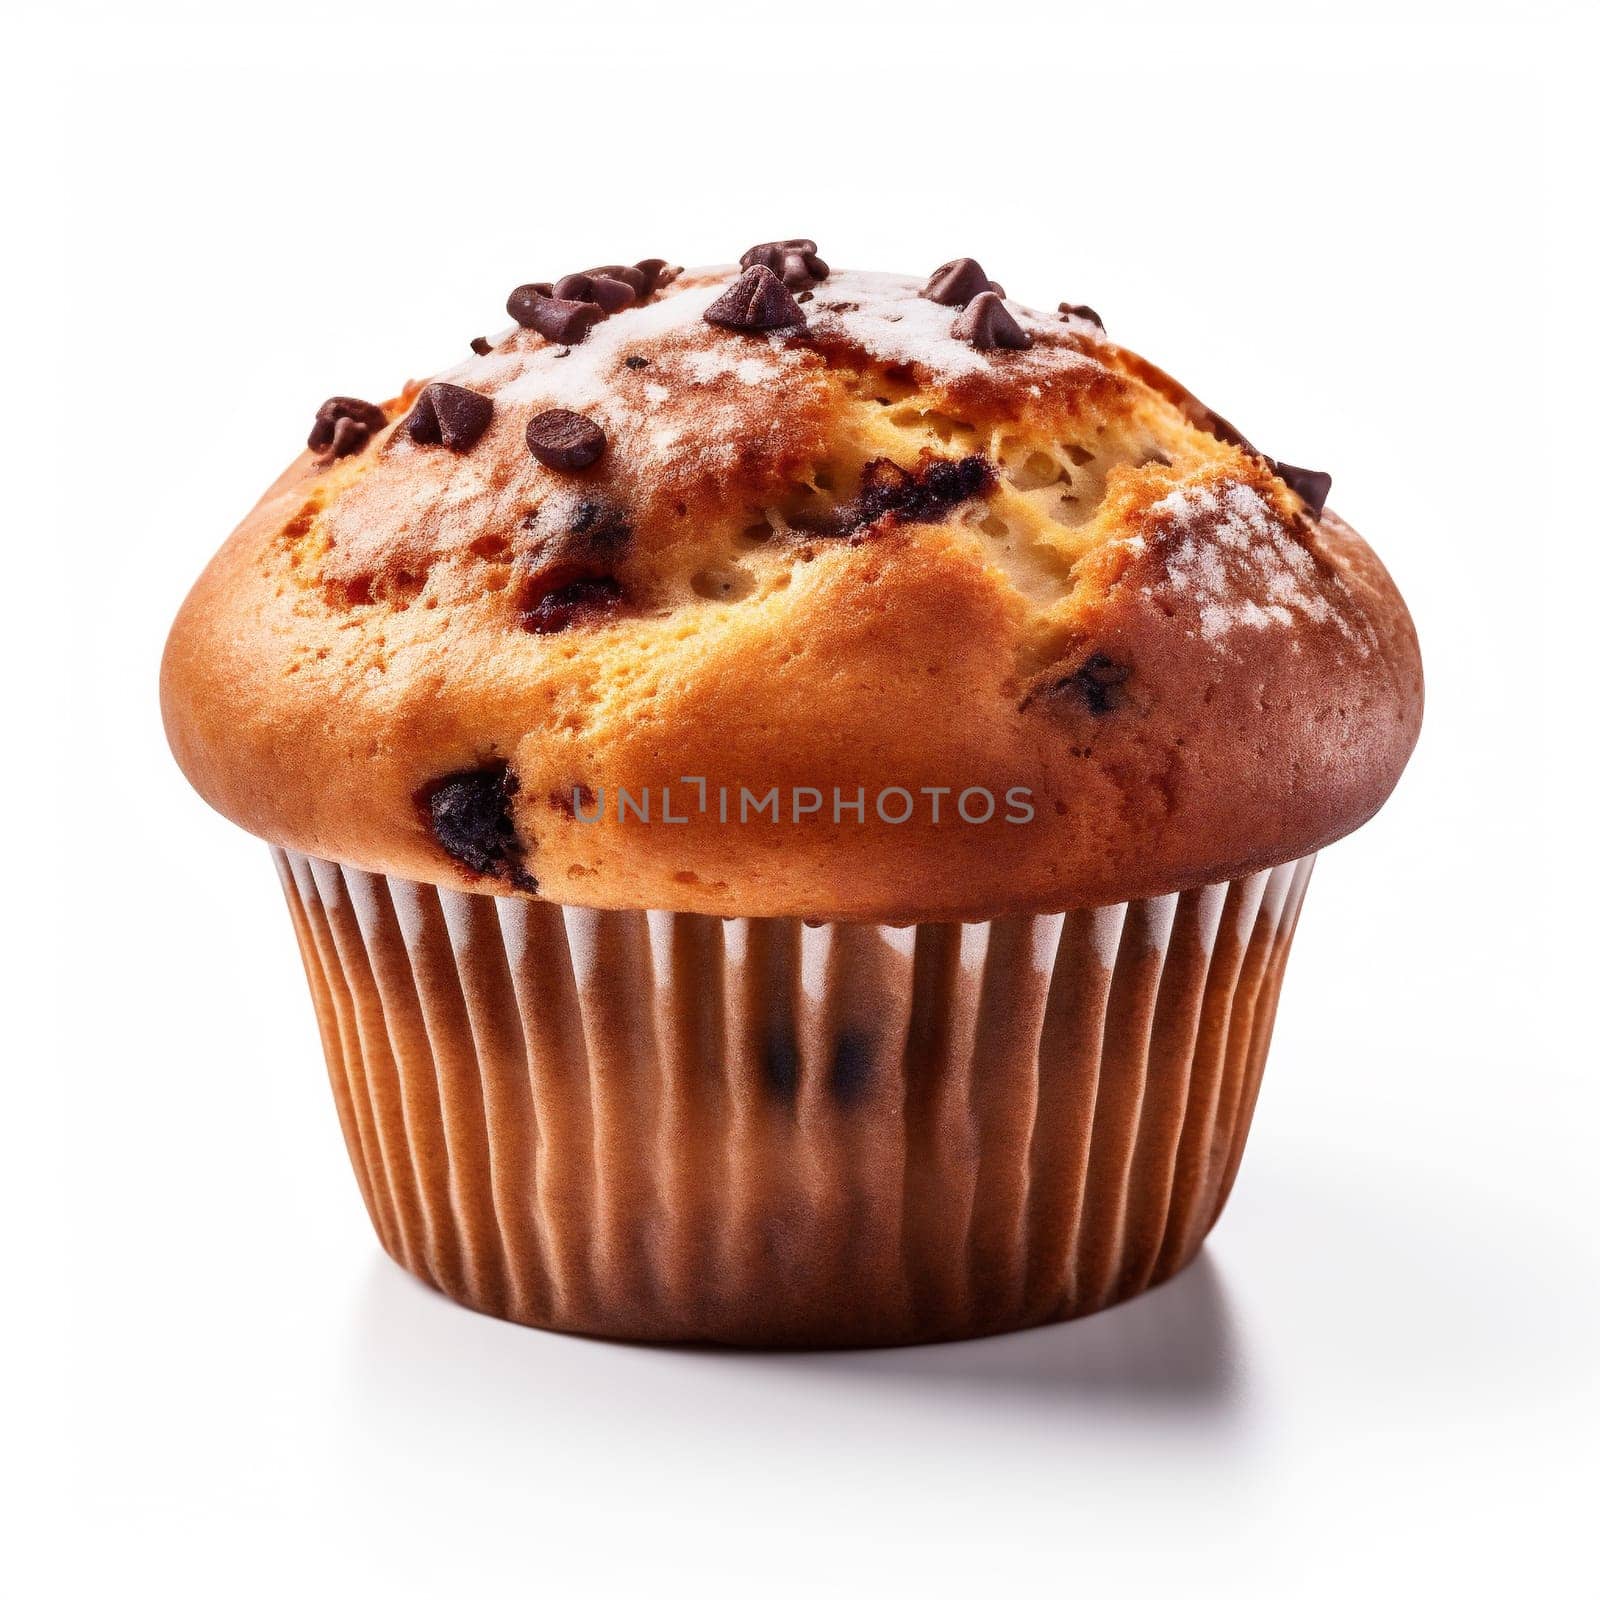 Fresh Baked Single Muffin Isolated on White Background. Muffin with Chocolate Chip in a Paper Muffin Cup.